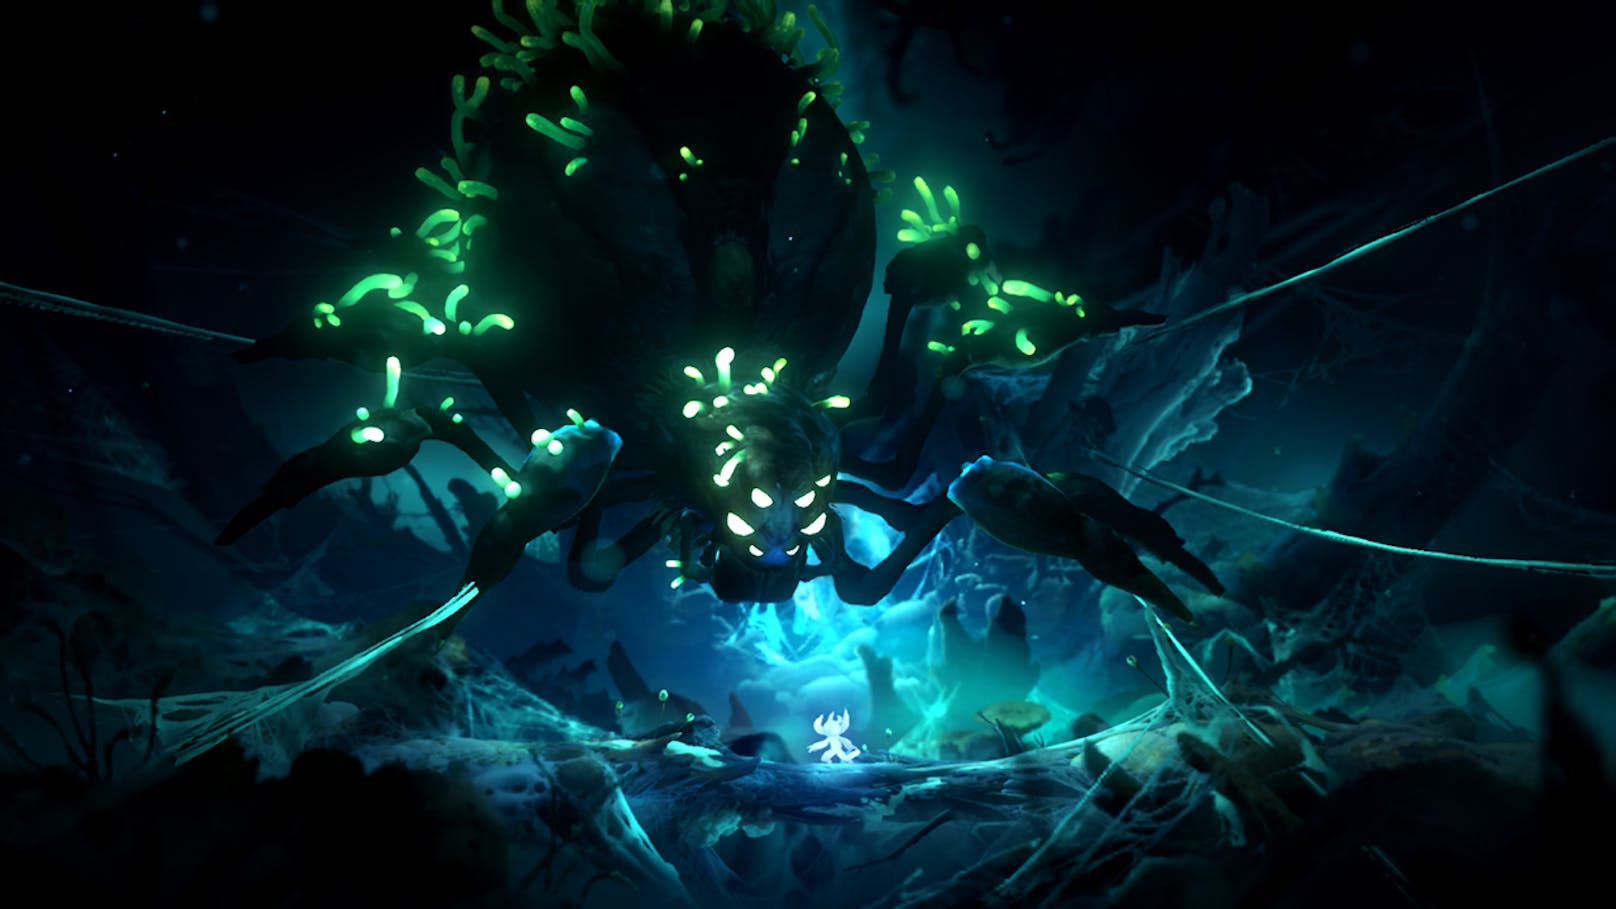 "Ori and the Will of the Wisps"